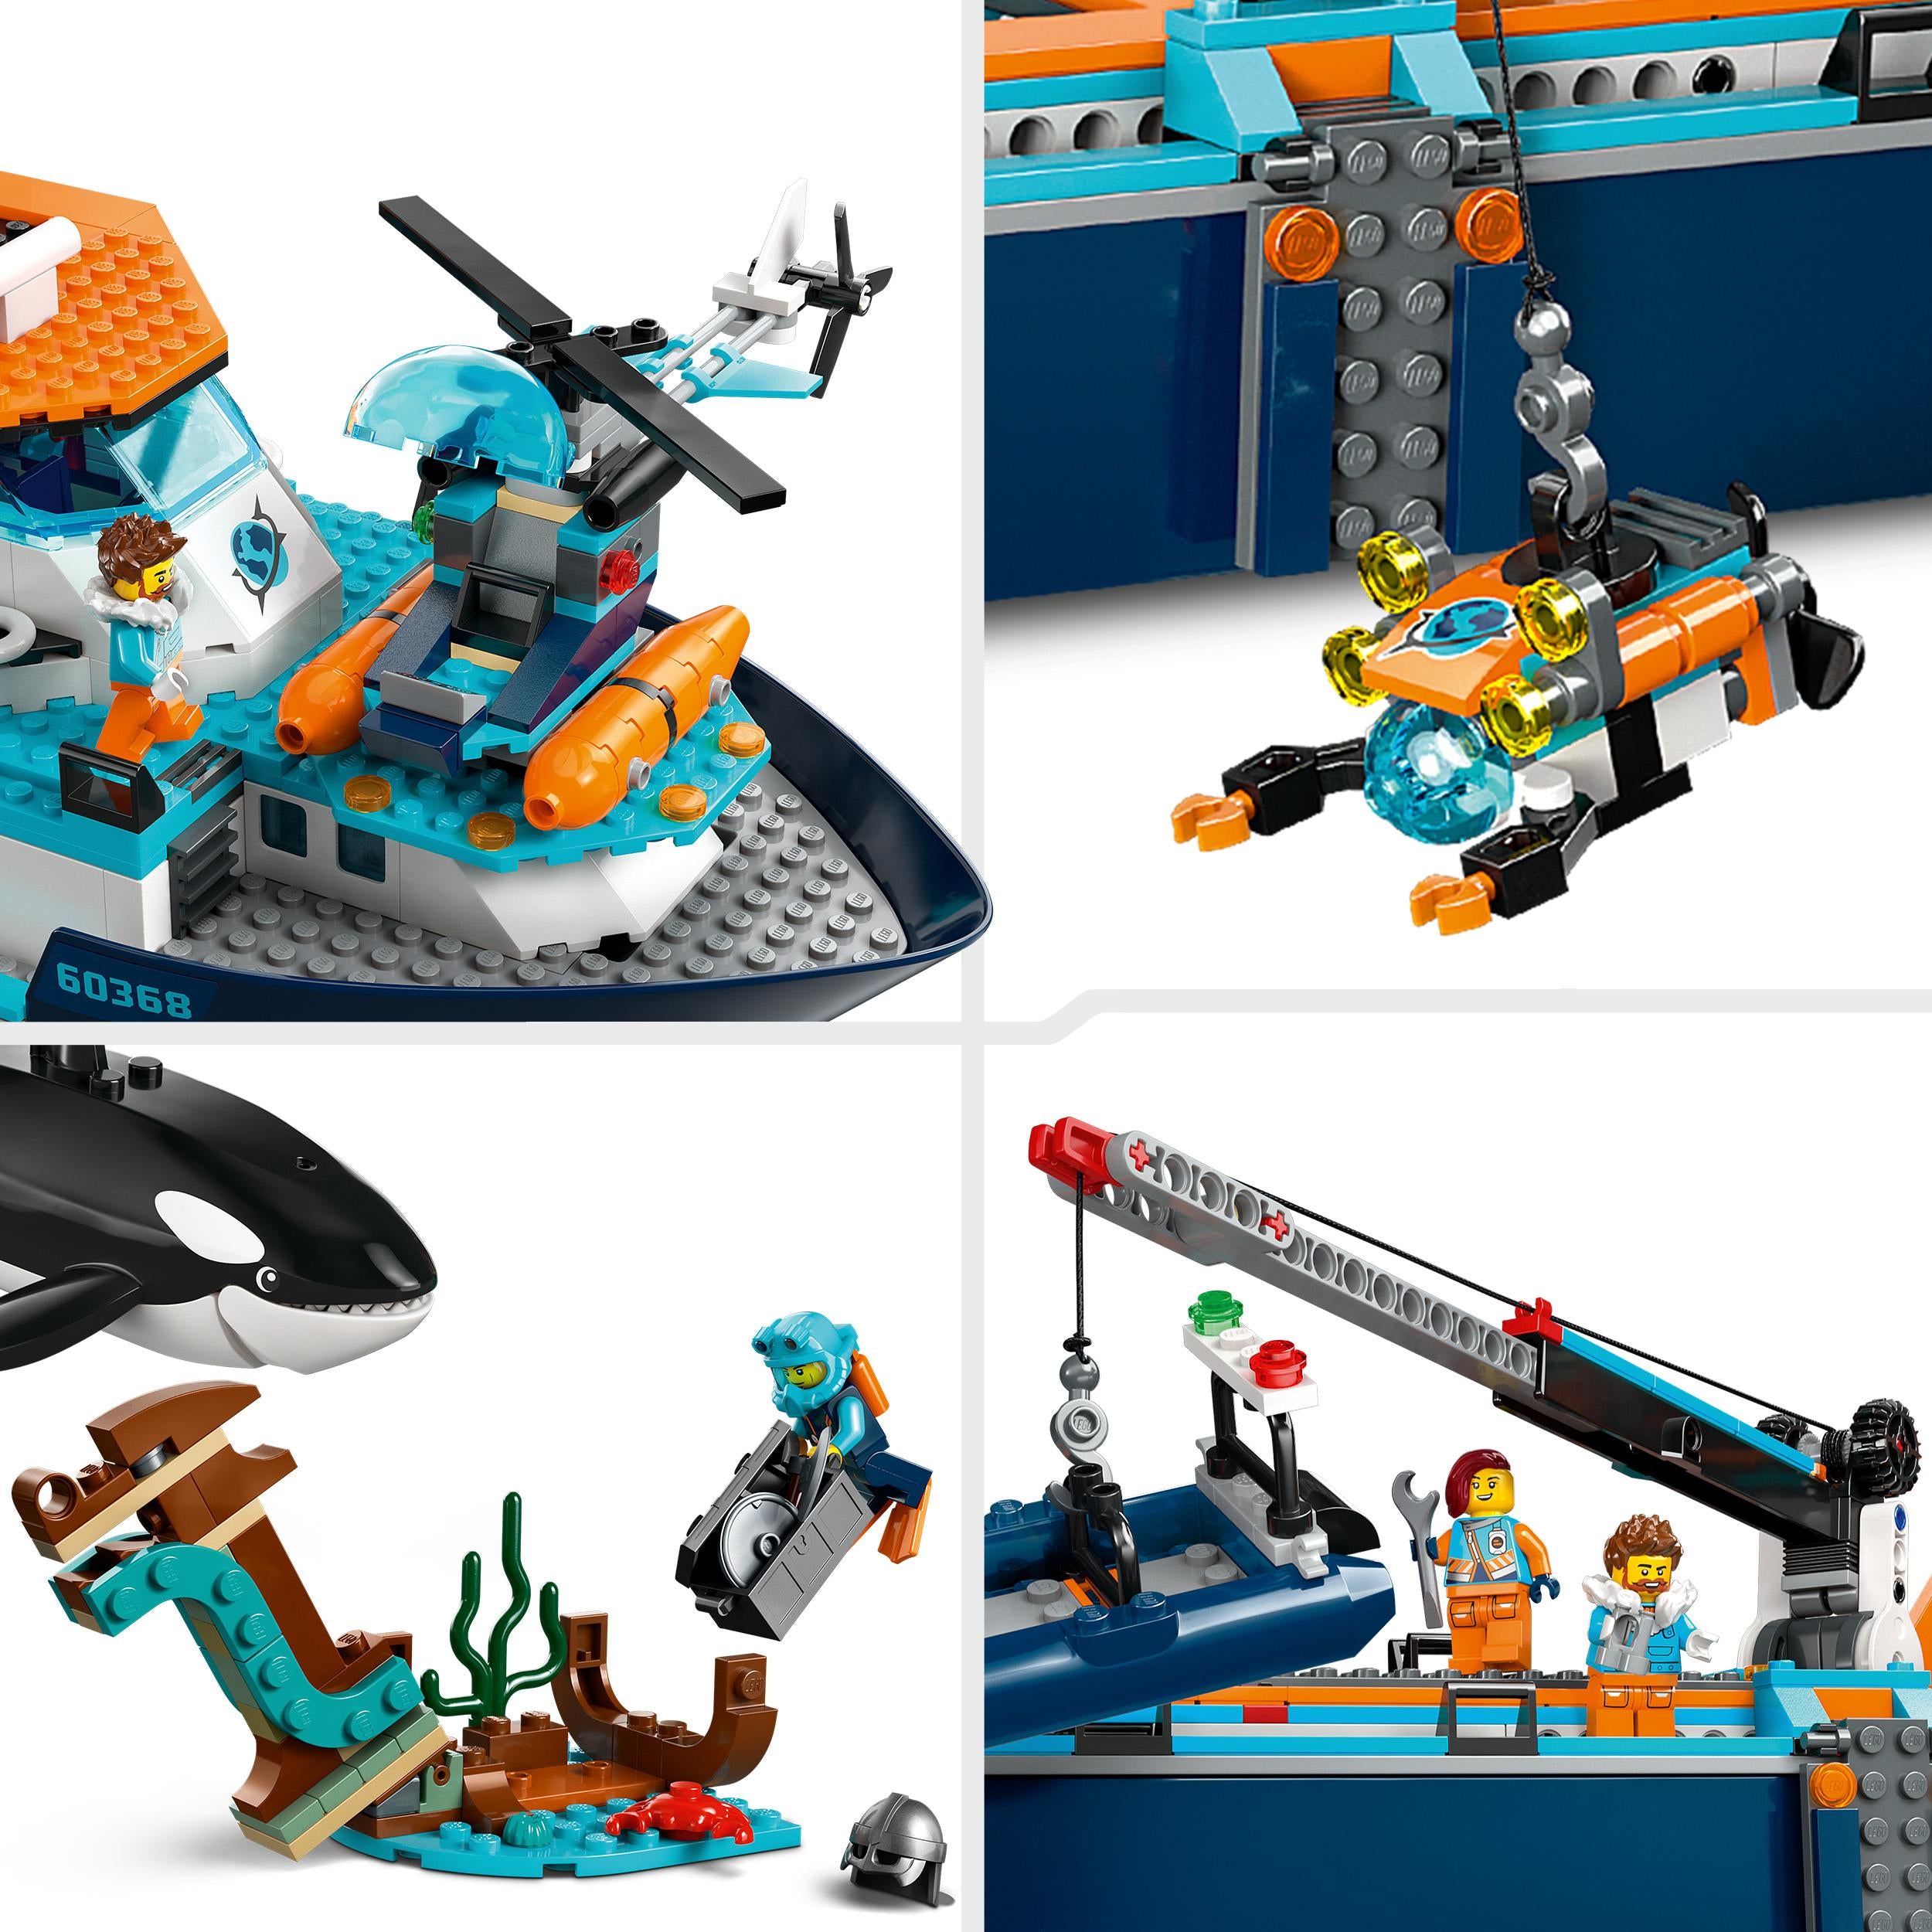 LEGO 60368 City Arctic Explorer Ship, Large Toy Boat that Floats with a Helicopter, Dinghy, Sub, Viking Shipwreck, 7 Minifigures and an Orca Figure, Gift for 7+ Year Old Kids, Boys, Girls